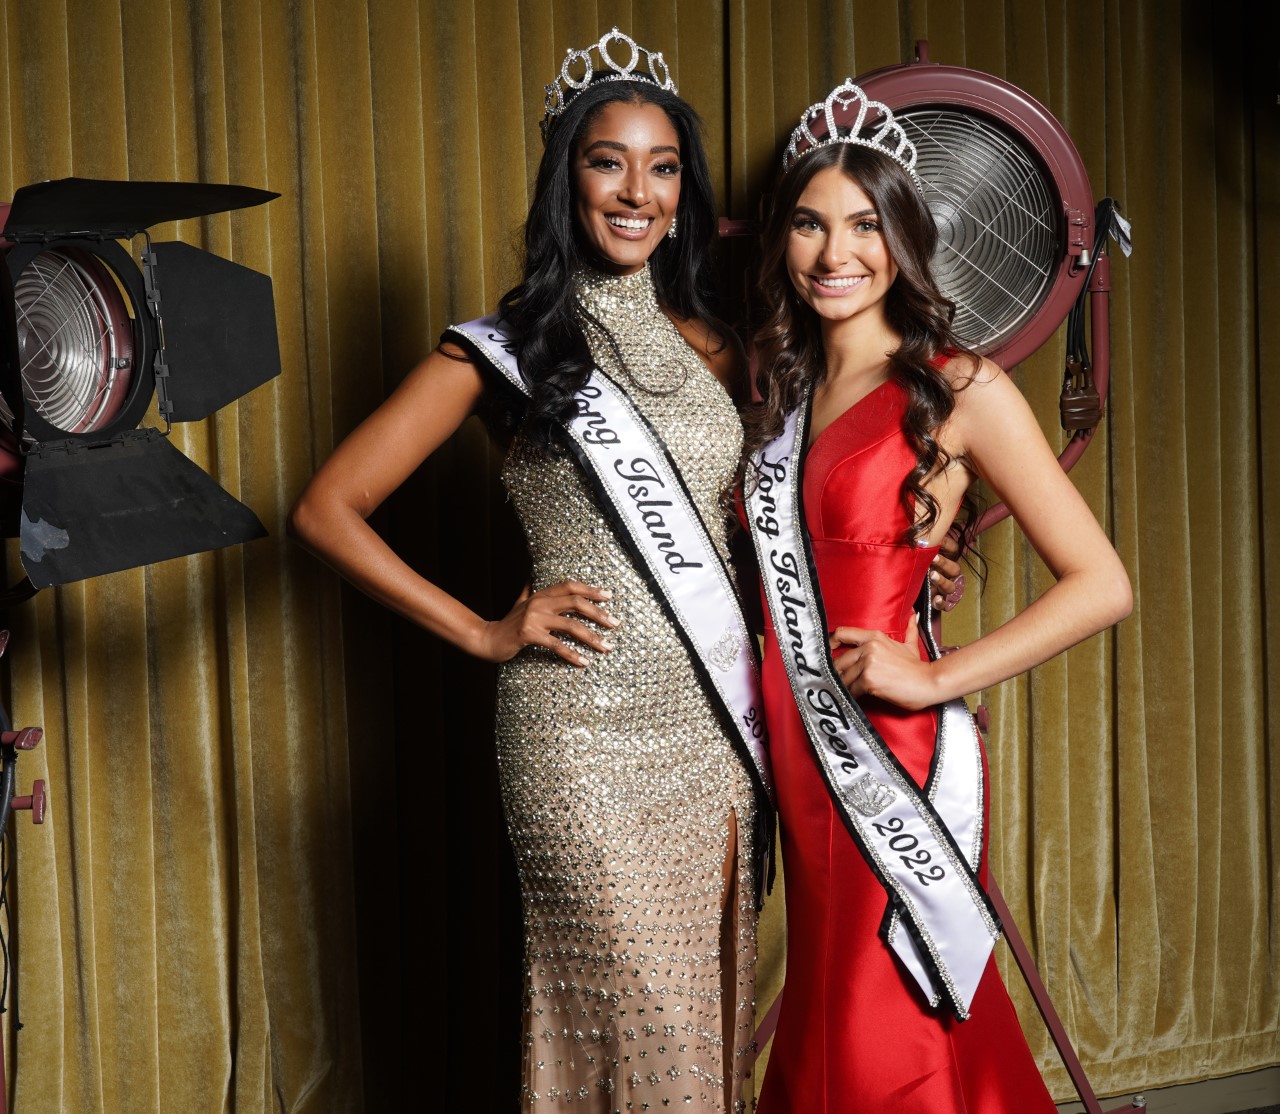 Image 1 Nadgeena Jerome was crowned Miss Long Island 2022 Jessica Fuentes was crowned Miss Long Island Teen 2022 Photo provided by J L Dream Productions Inc.